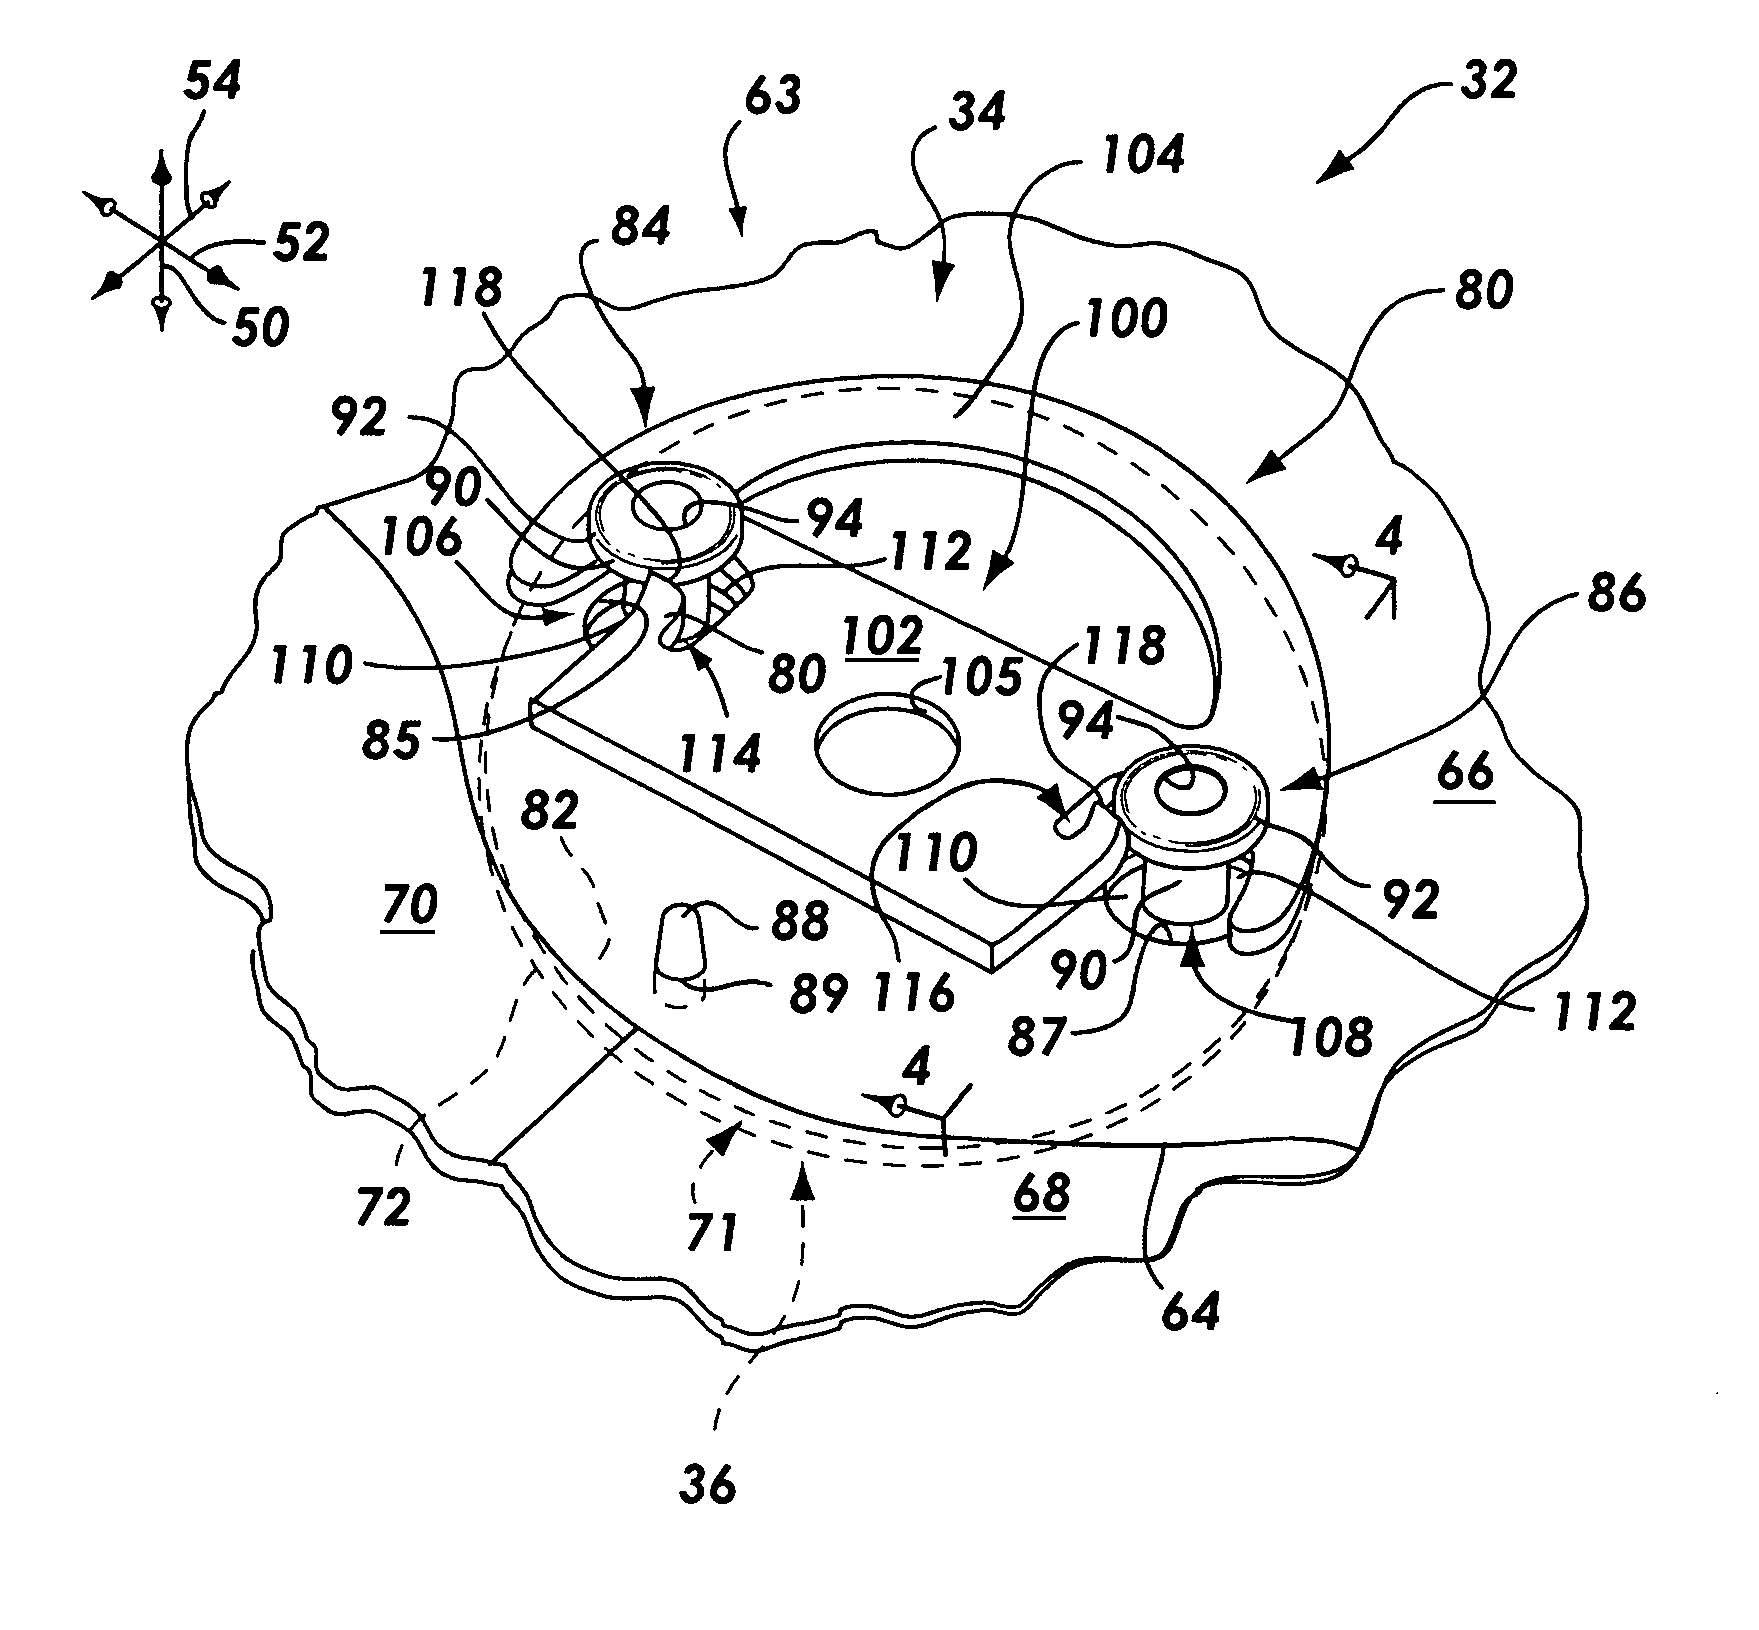 Airbag cover emblem attachment apparatus and method